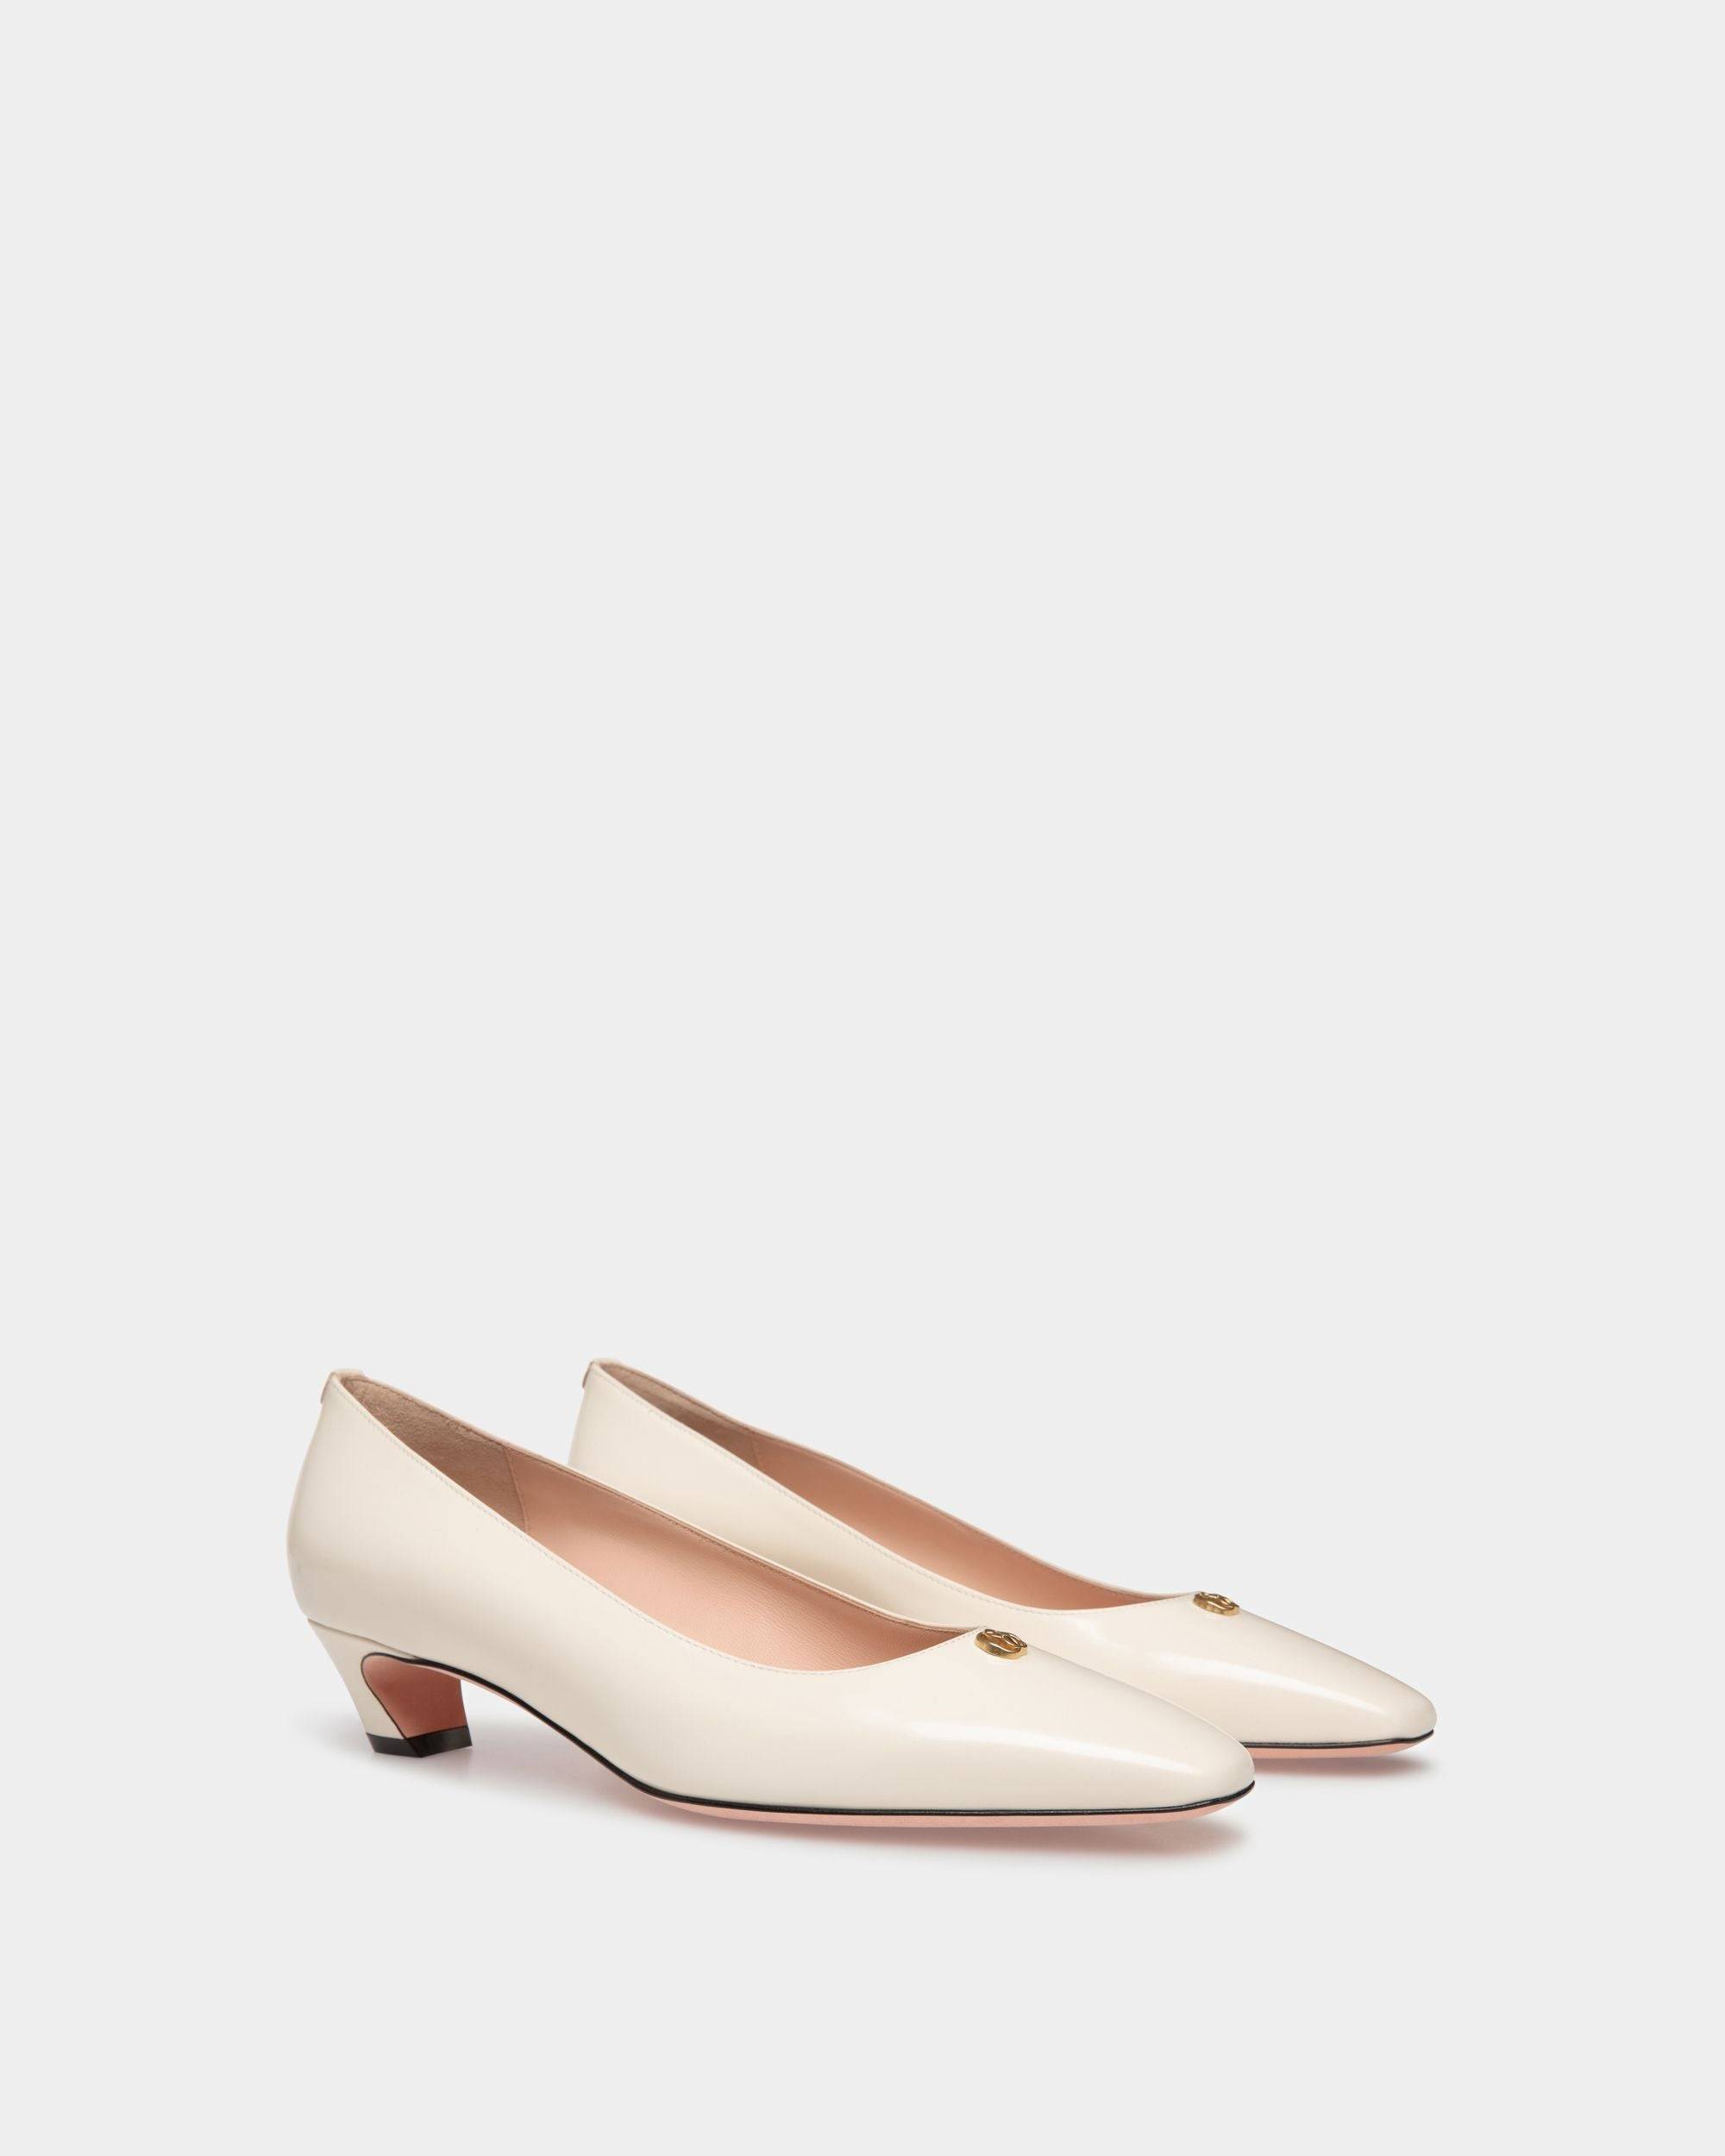 Sylt | Women's Pump in White Leather | Bally | Still Life 3/4 Front